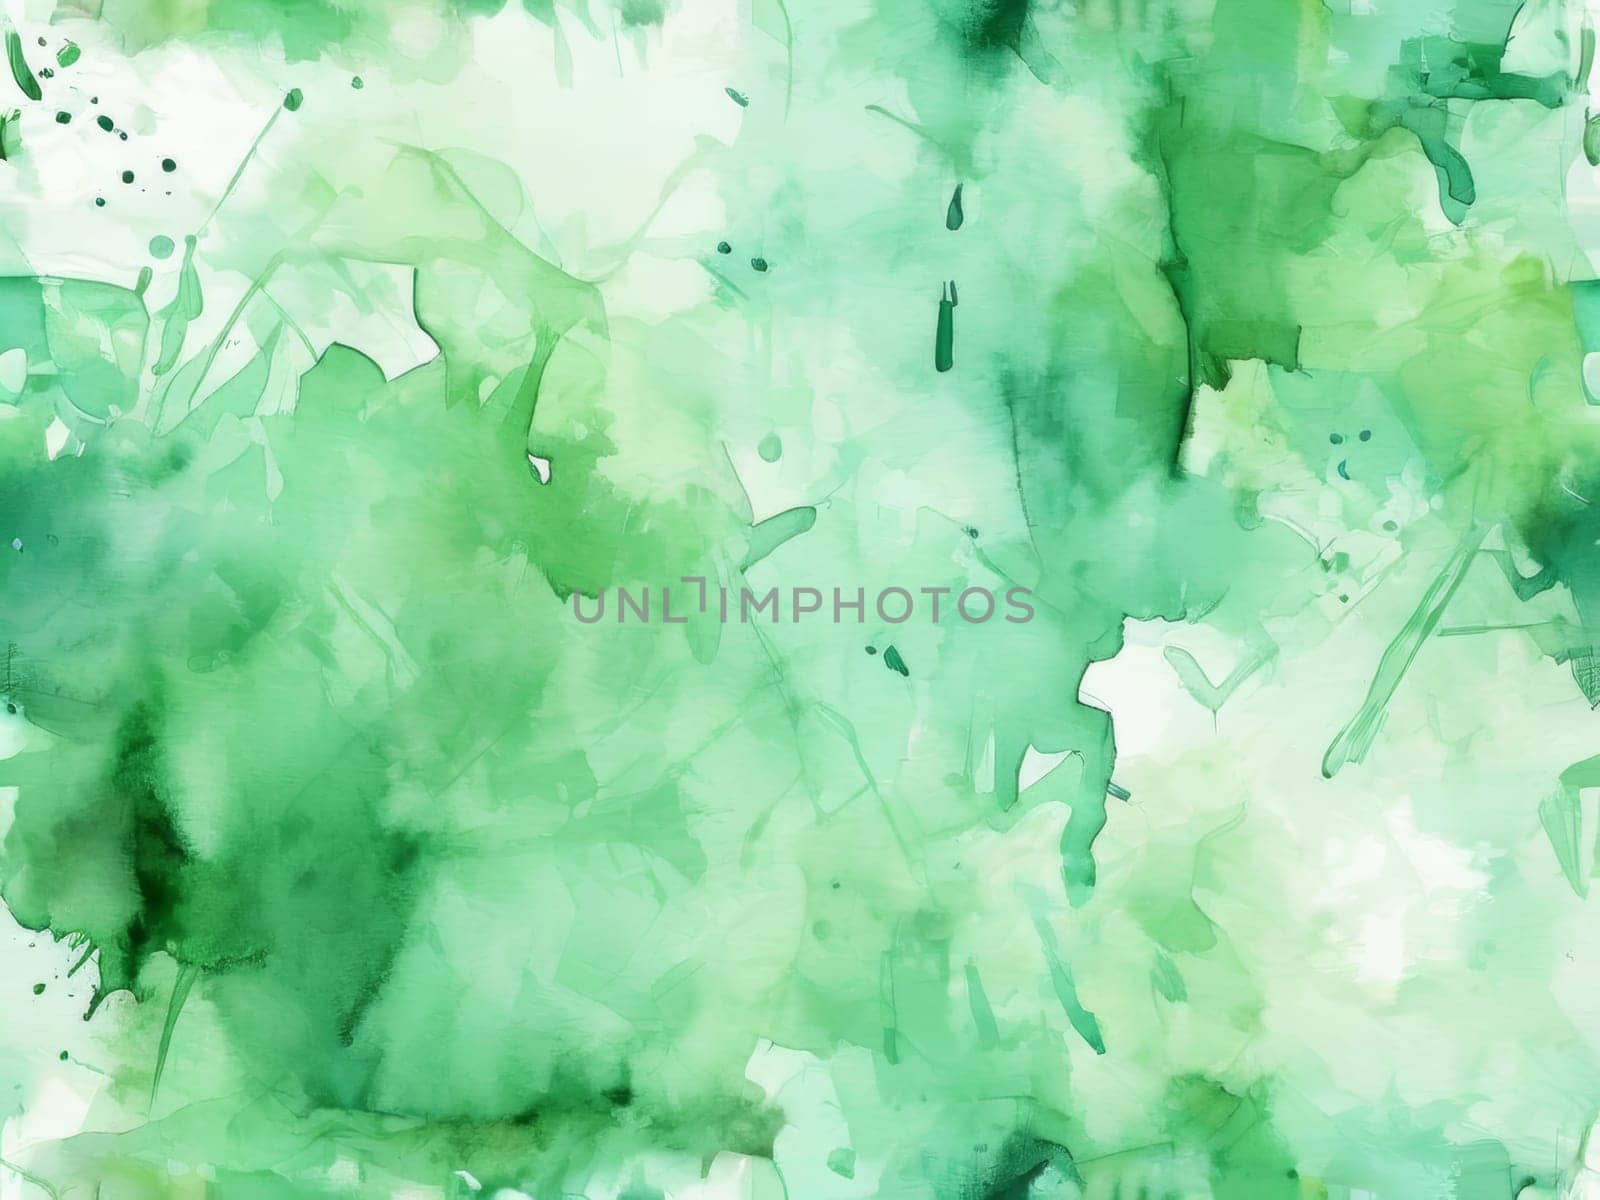 Green watercolor background. Watercolor backdrop with brushes smears in green color on white paper background as watercolor background with copy space.